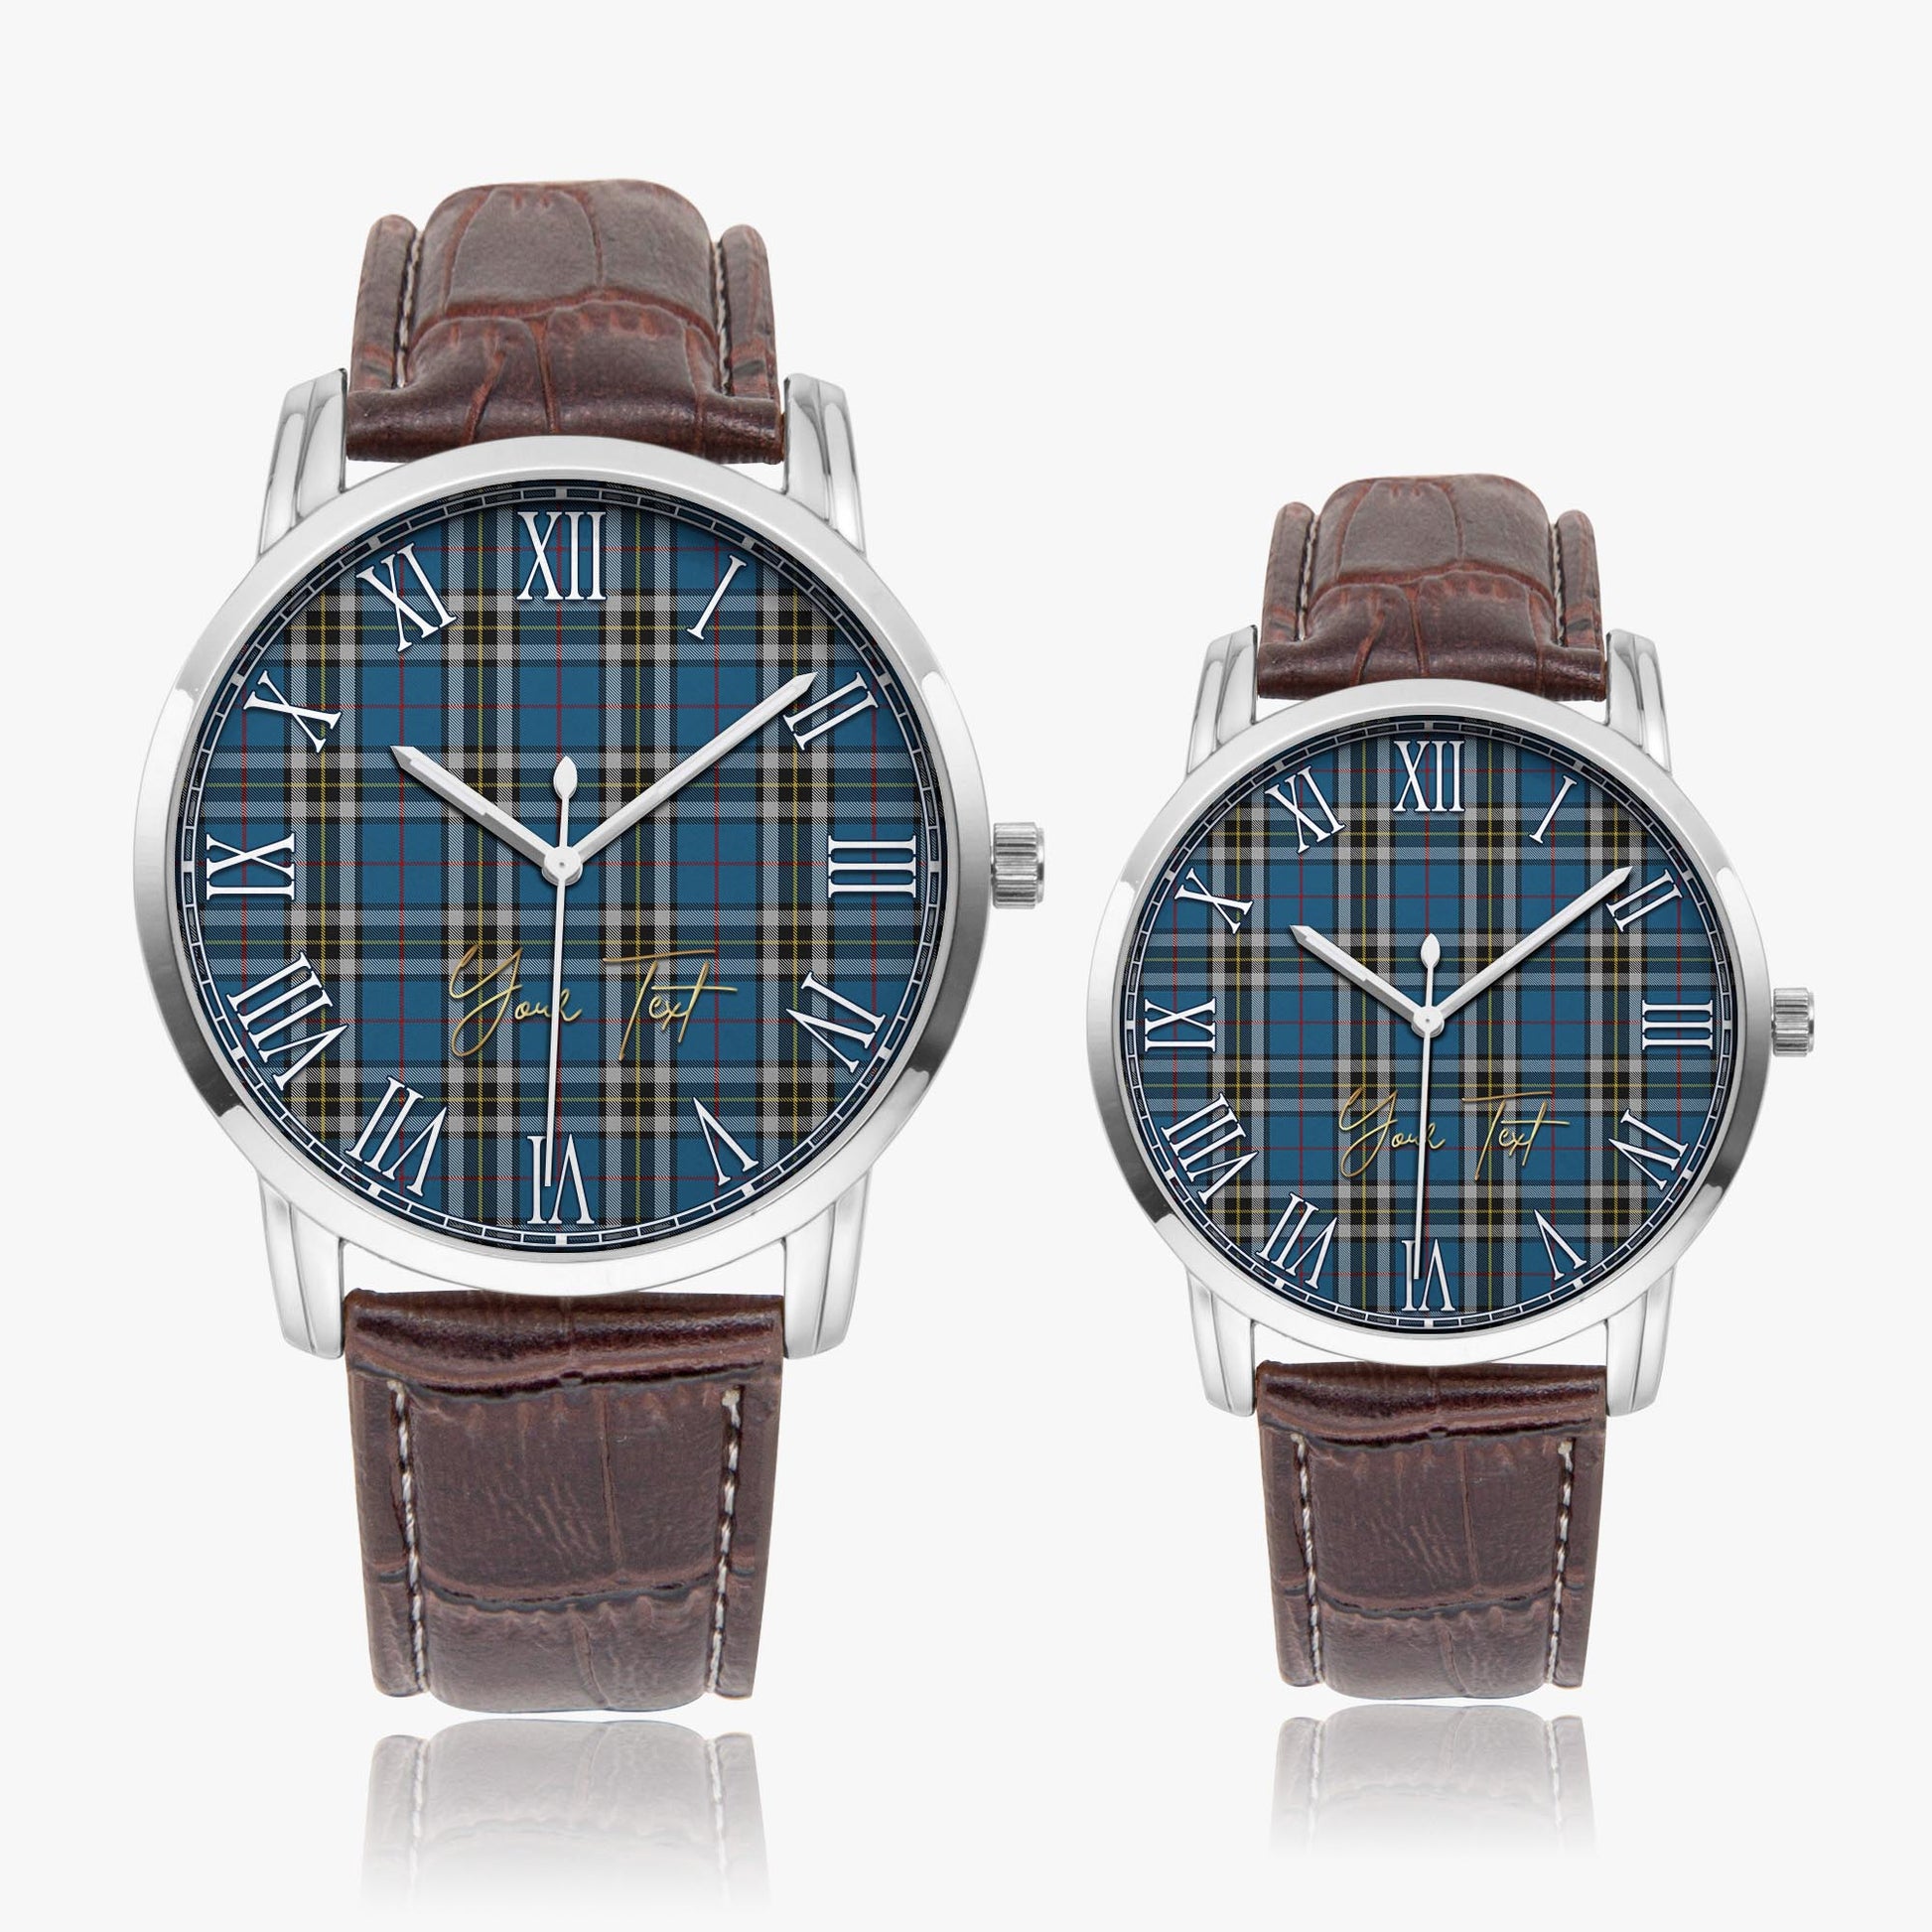 Thomson Dress Blue Tartan Personalized Your Text Leather Trap Quartz Watch Wide Type Silver Case With Brown Leather Strap - Tartanvibesclothing Shop